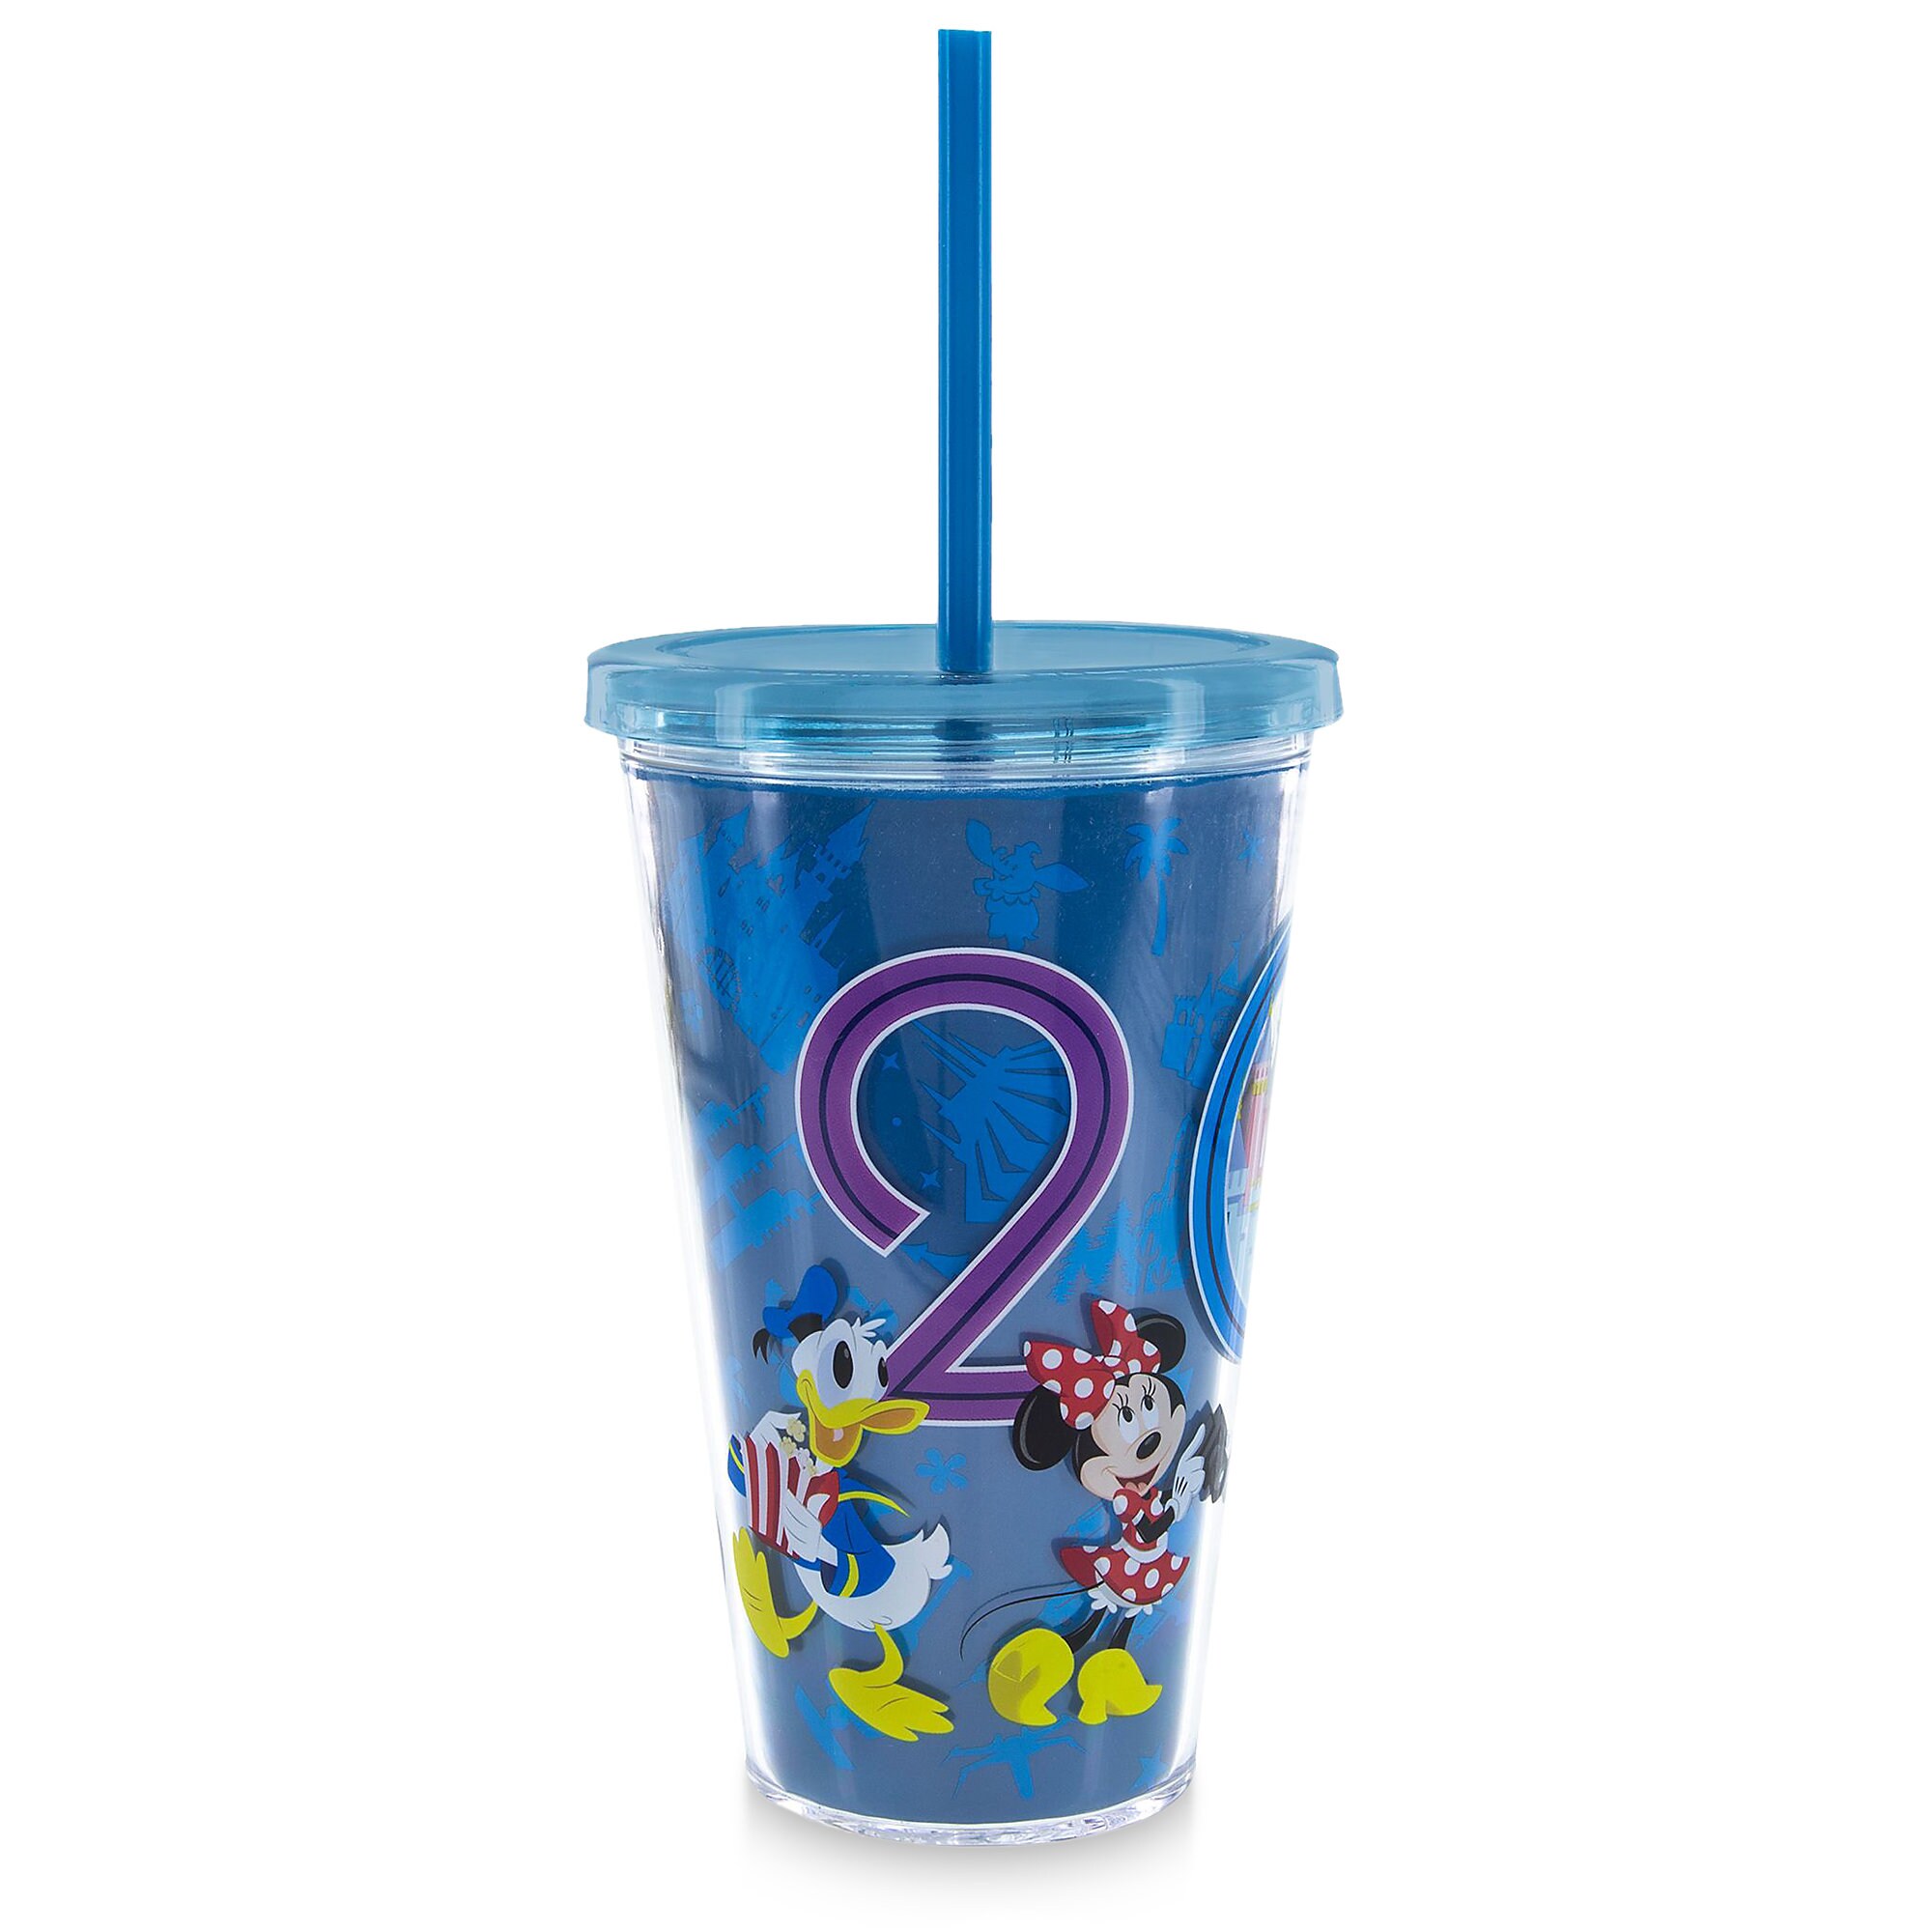 Mickey Mouse and Friends Tumbler with Straw - Disneyland 2019